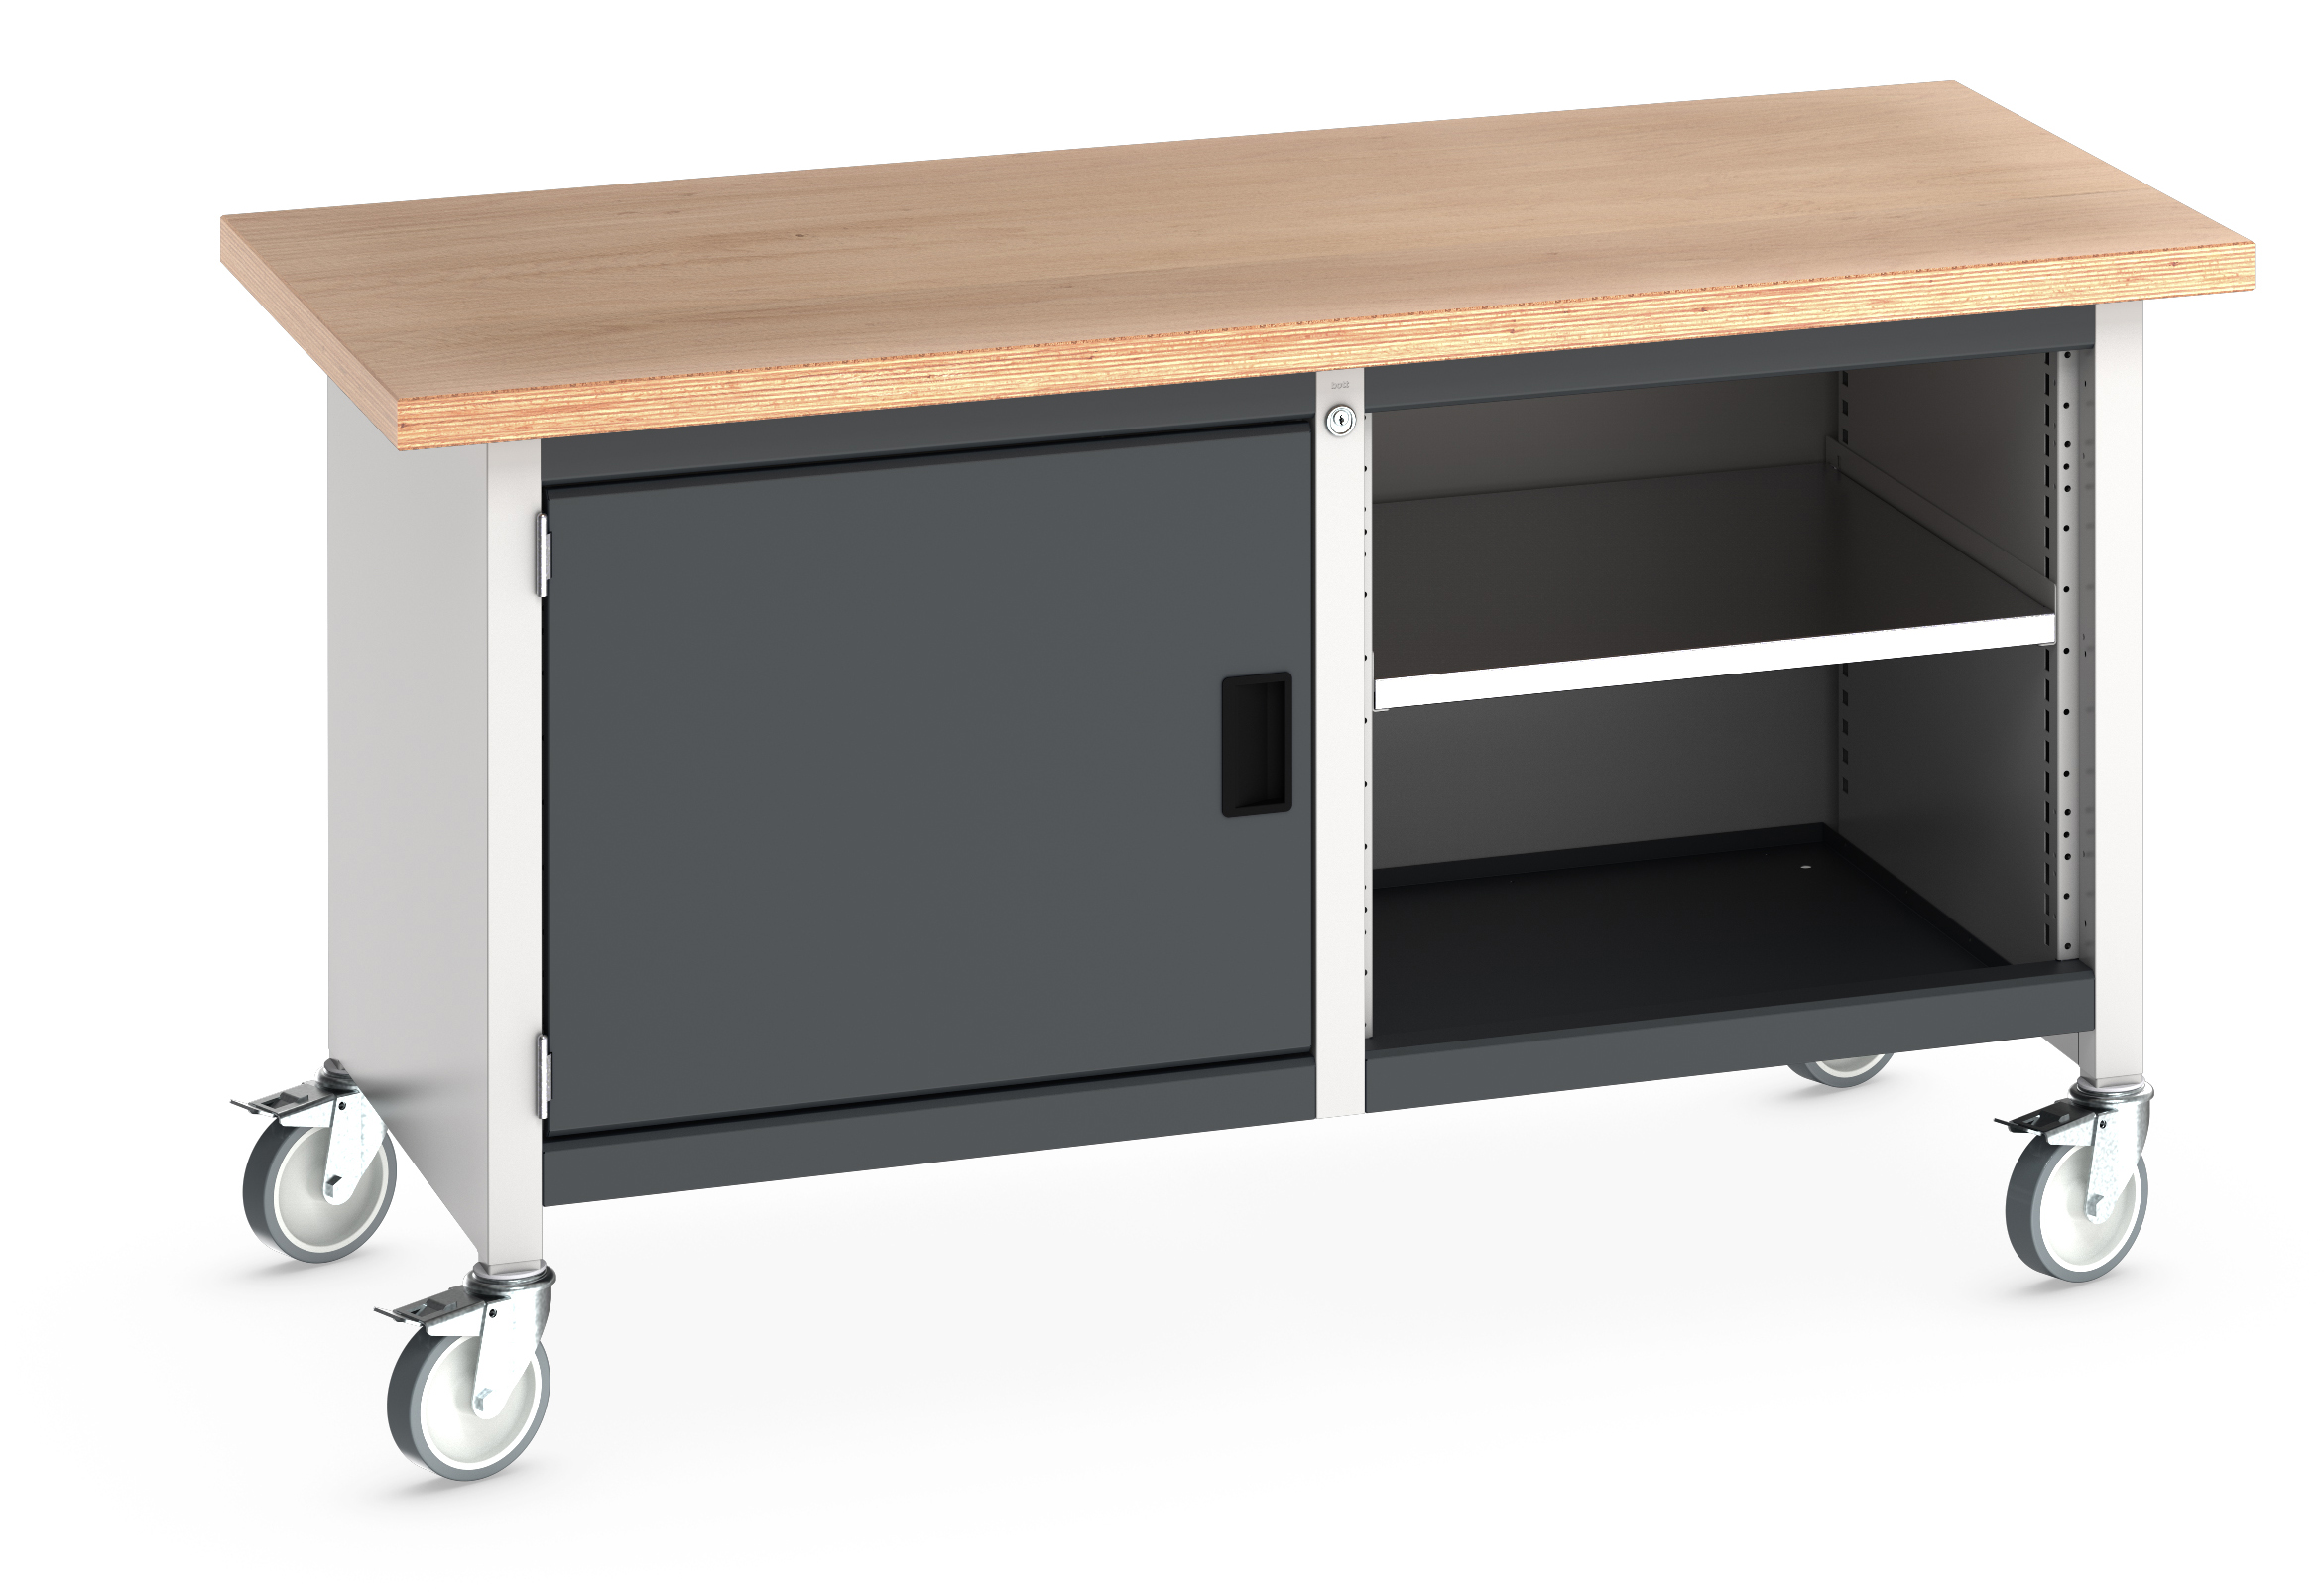 Bott Cubio Mobile Storage Bench With Full Cupboard / Open Cupboard - 41002094.19V